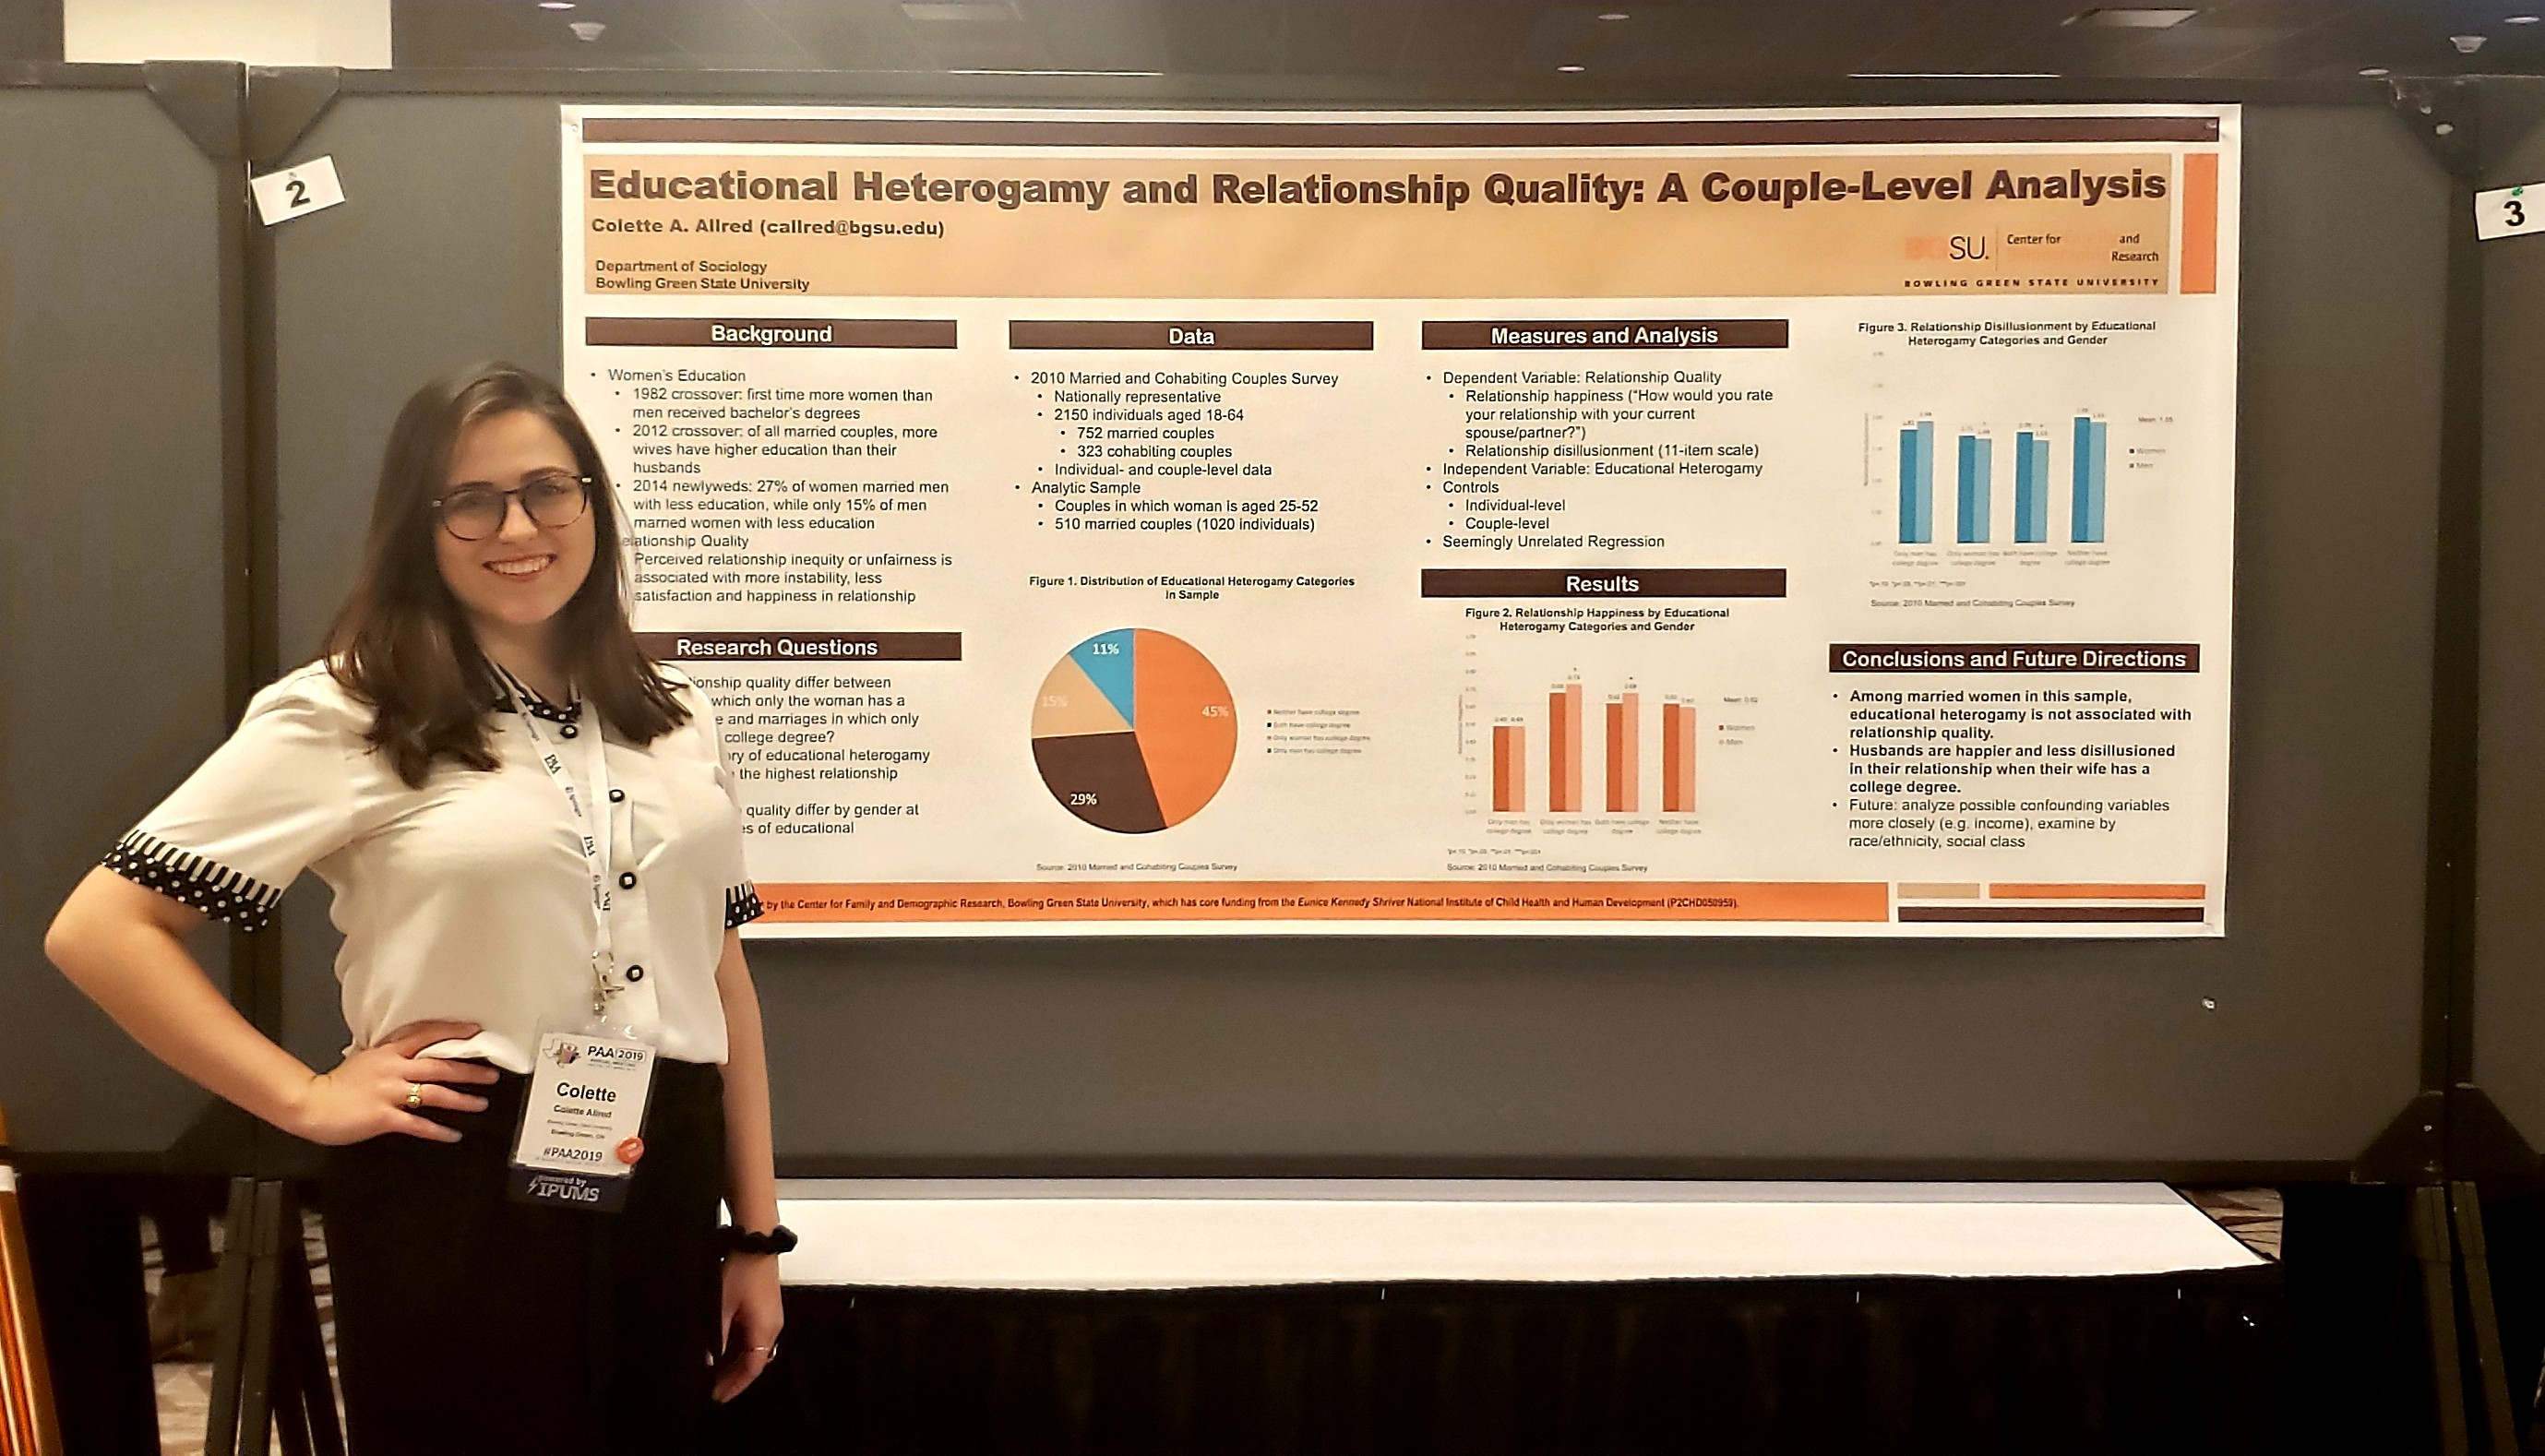 Colette Allred wins research poster award during the 2019 Population Association of America (PAA) conference for her research poster "Educational Heterogamy and Relationship Quality: A Couple-Level Analysis."